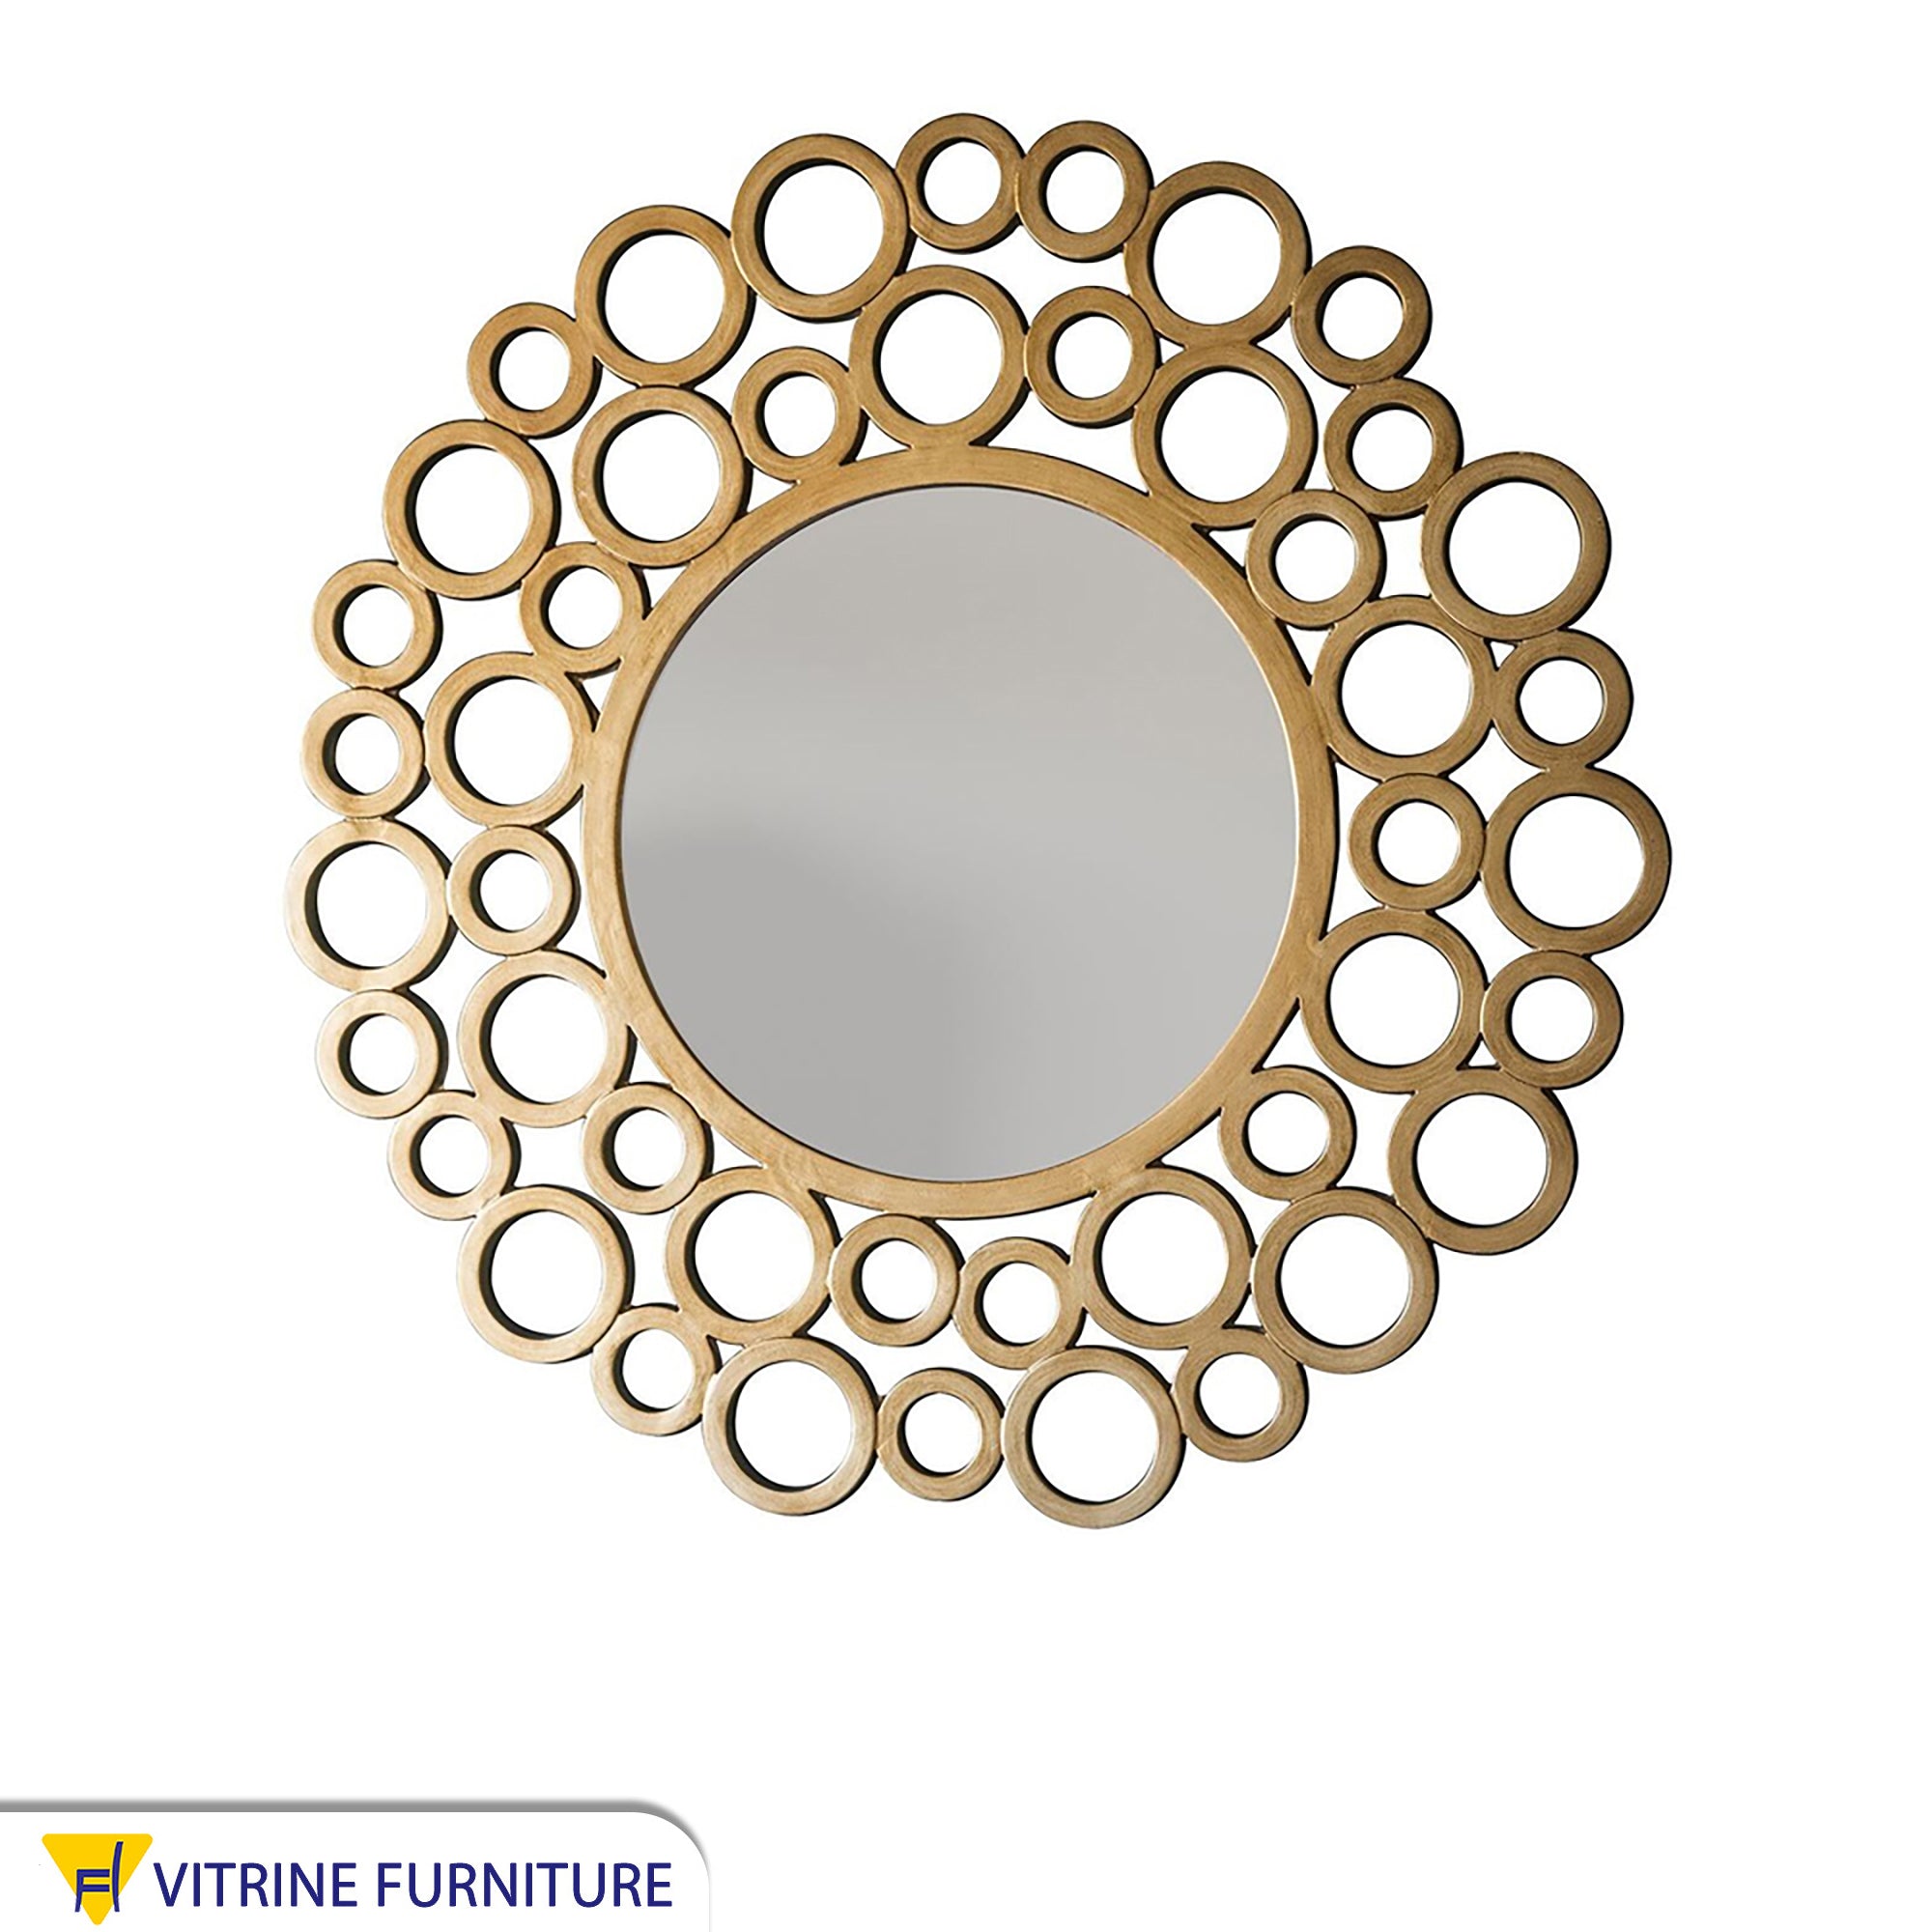 A circular mirror with a frame of multiple wooden circles